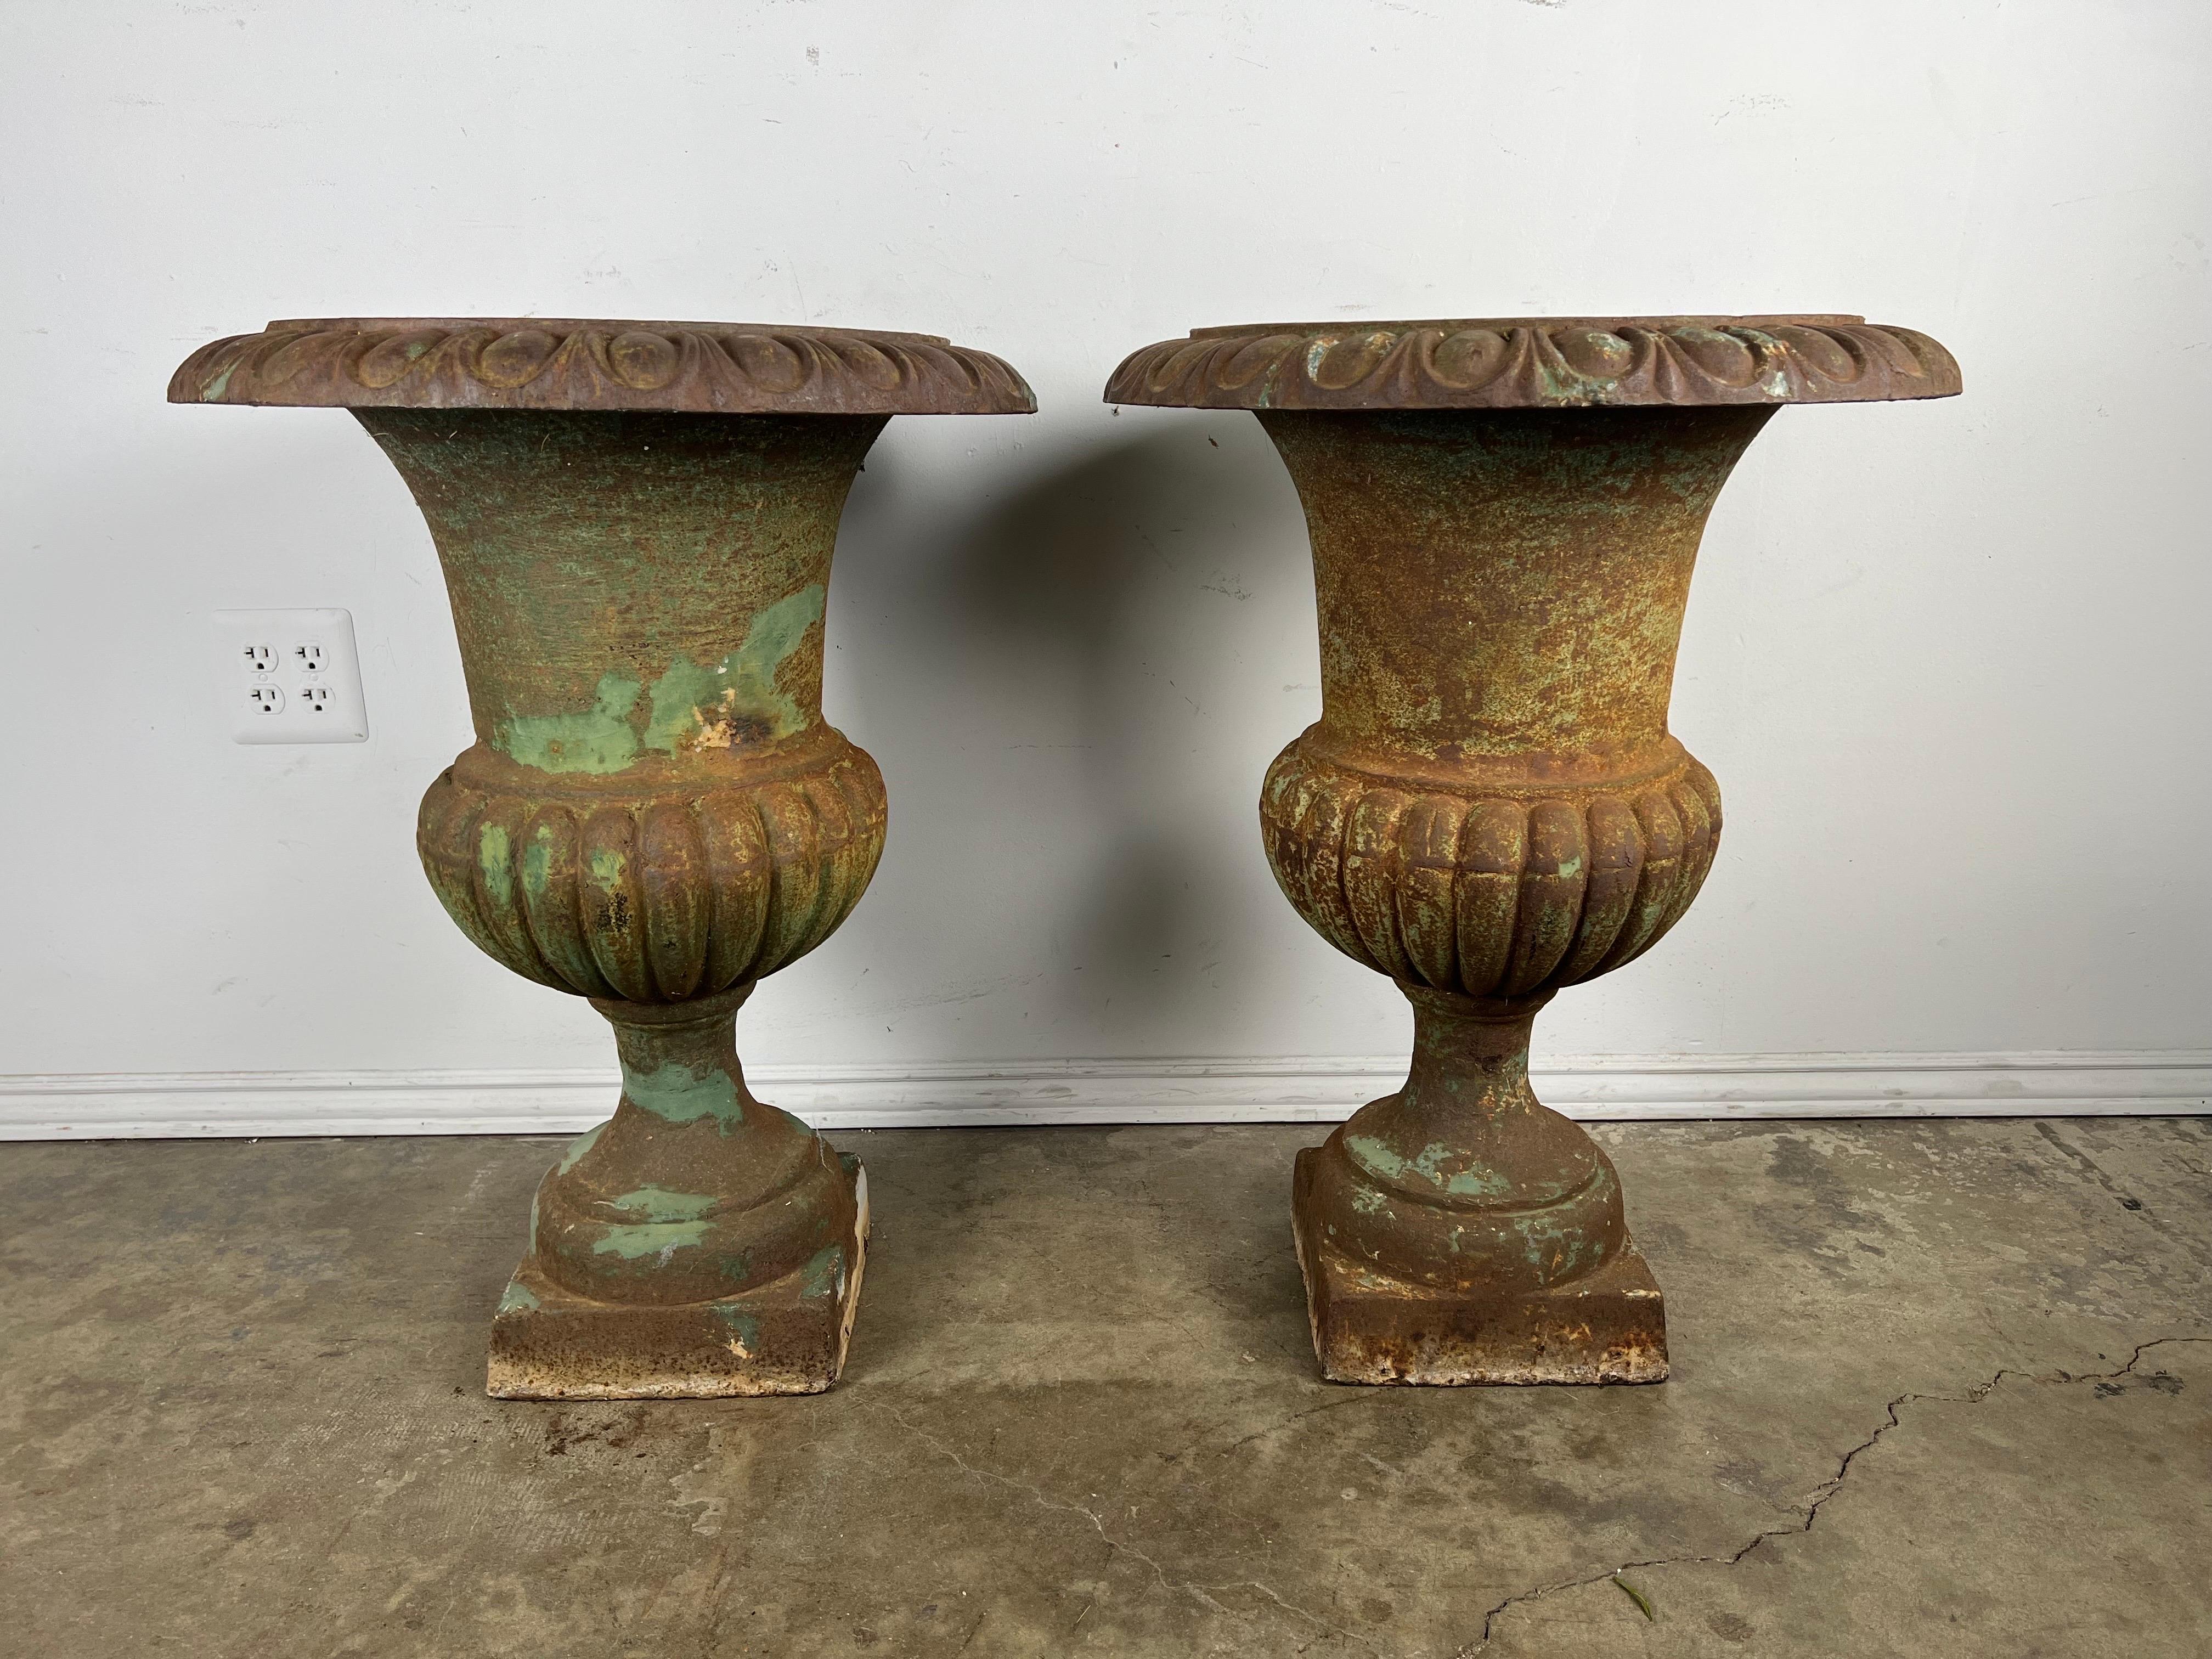 Pair of 19th century Italian cast iron urns. The urns have developed a beautiful patina over the years. They have rust but it adds charm to the antique planters.